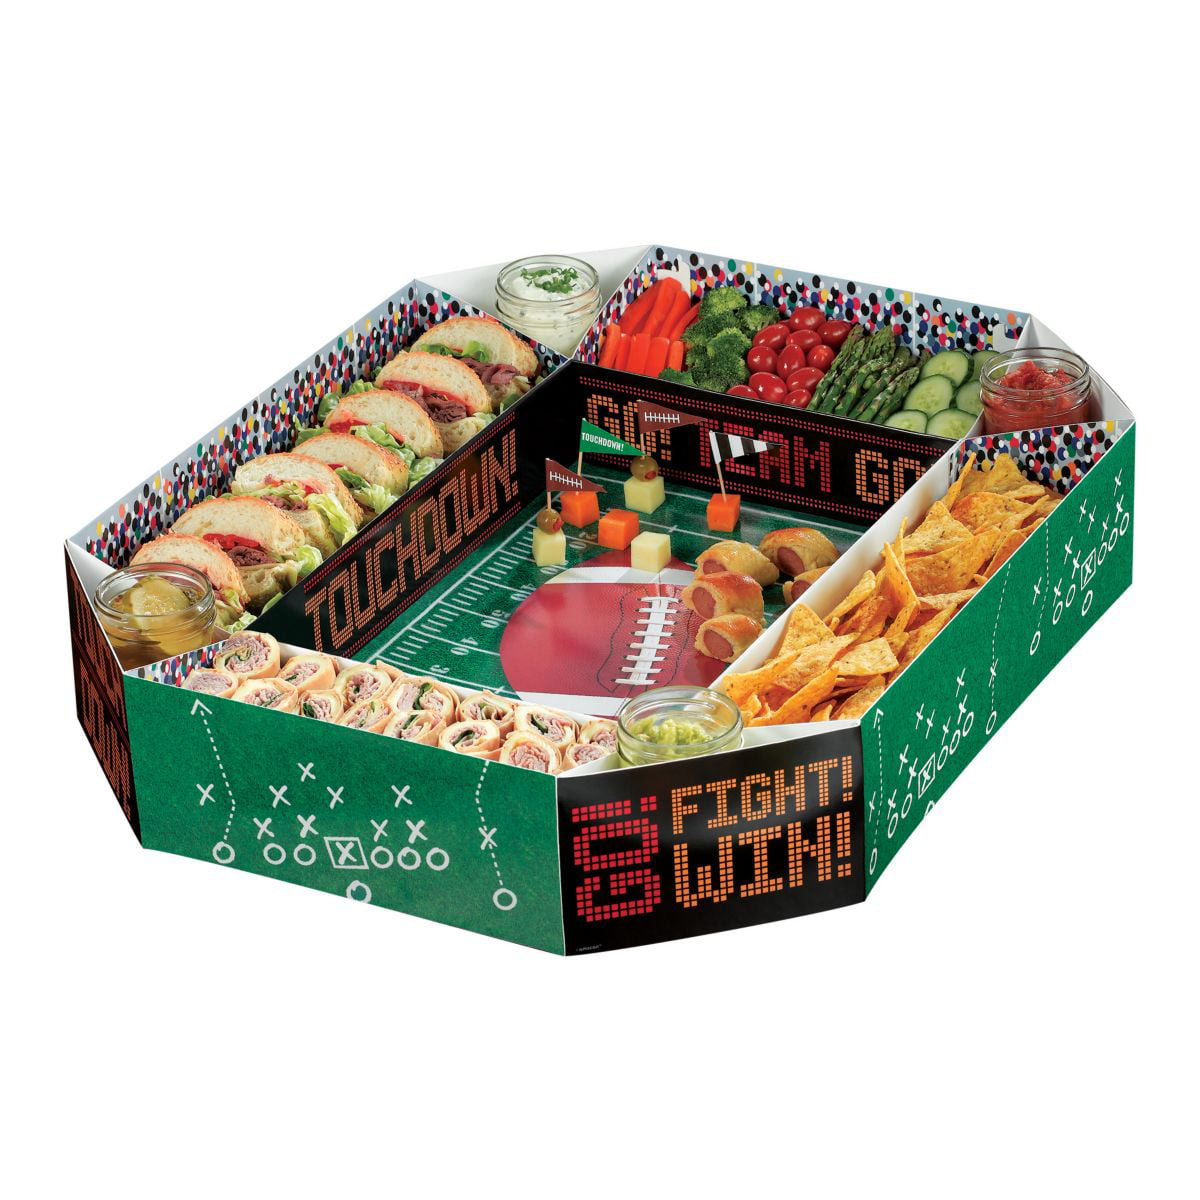 25 x 4.5 x 20.5 Inches Juvale & Dipping Bowls Blue Panda Football Snack Stadium Party Tray for Appetizers 